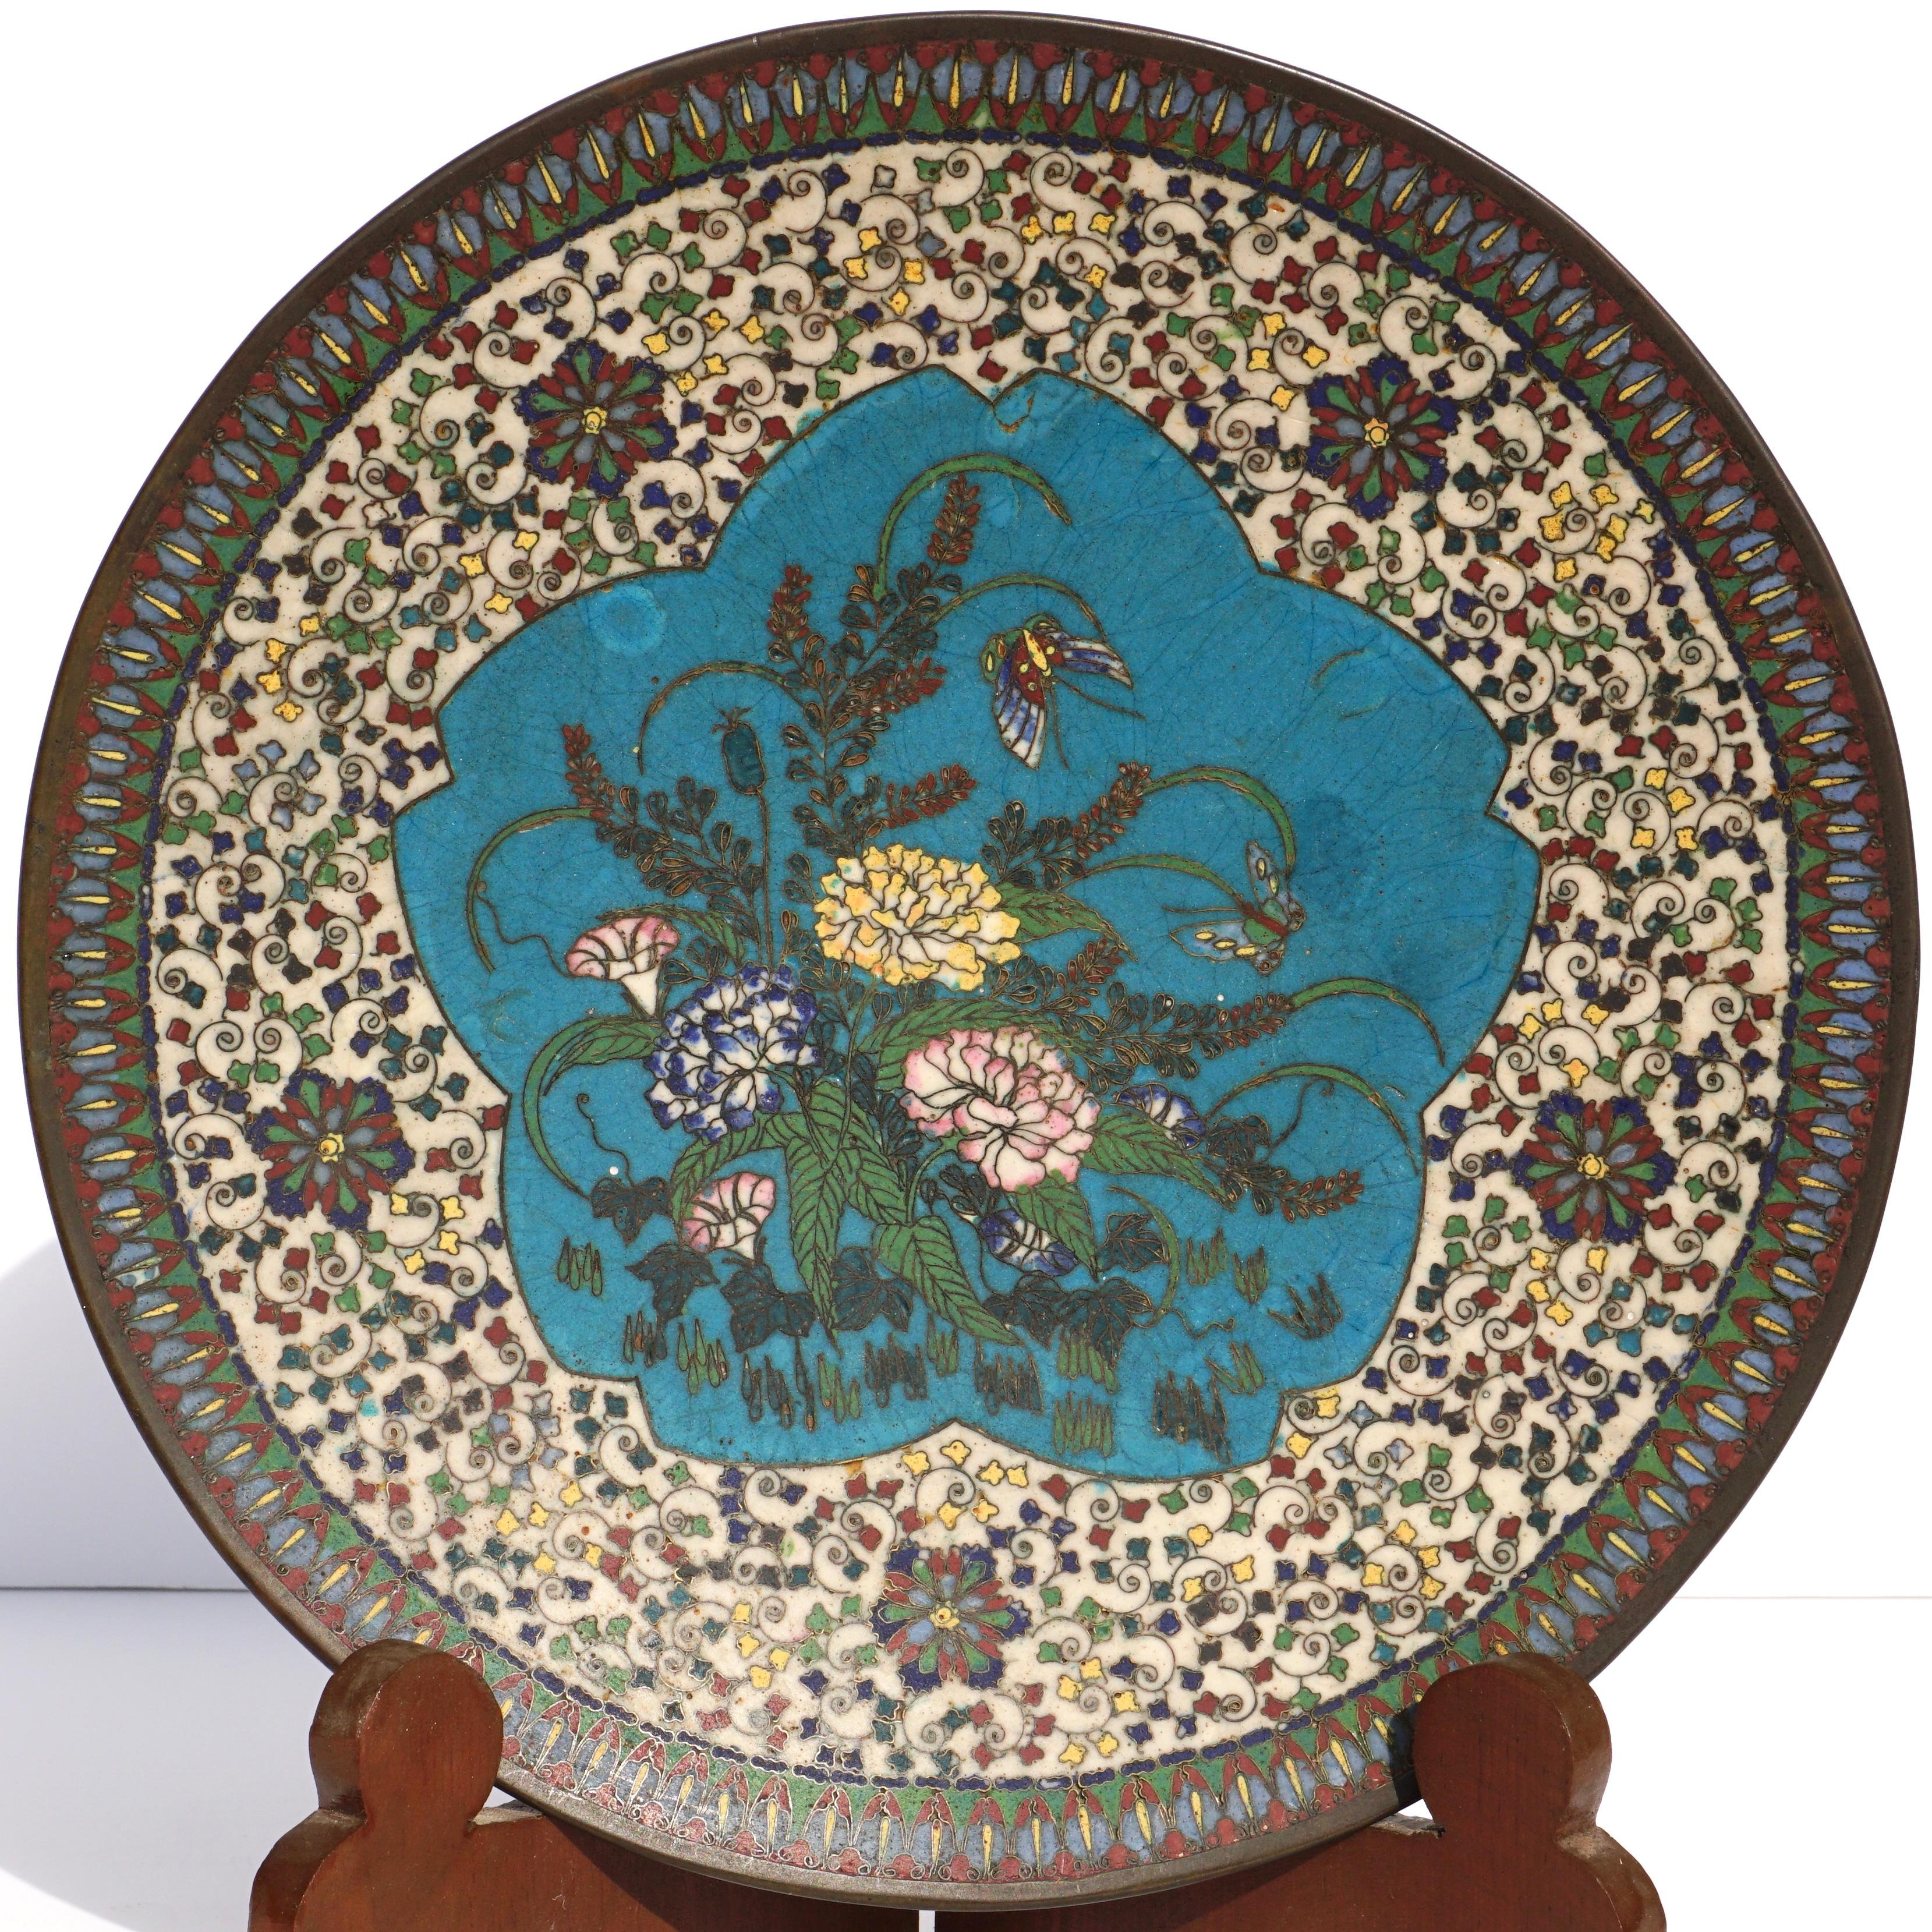 A rare and beautiful pair of charger plates from 1900 Meiji, Japan. Infused with fine and detailed enamel cloisonné work comprised of geometric and classical floral designs. Add some birds, butterflies and insects and these chargers are ready to add